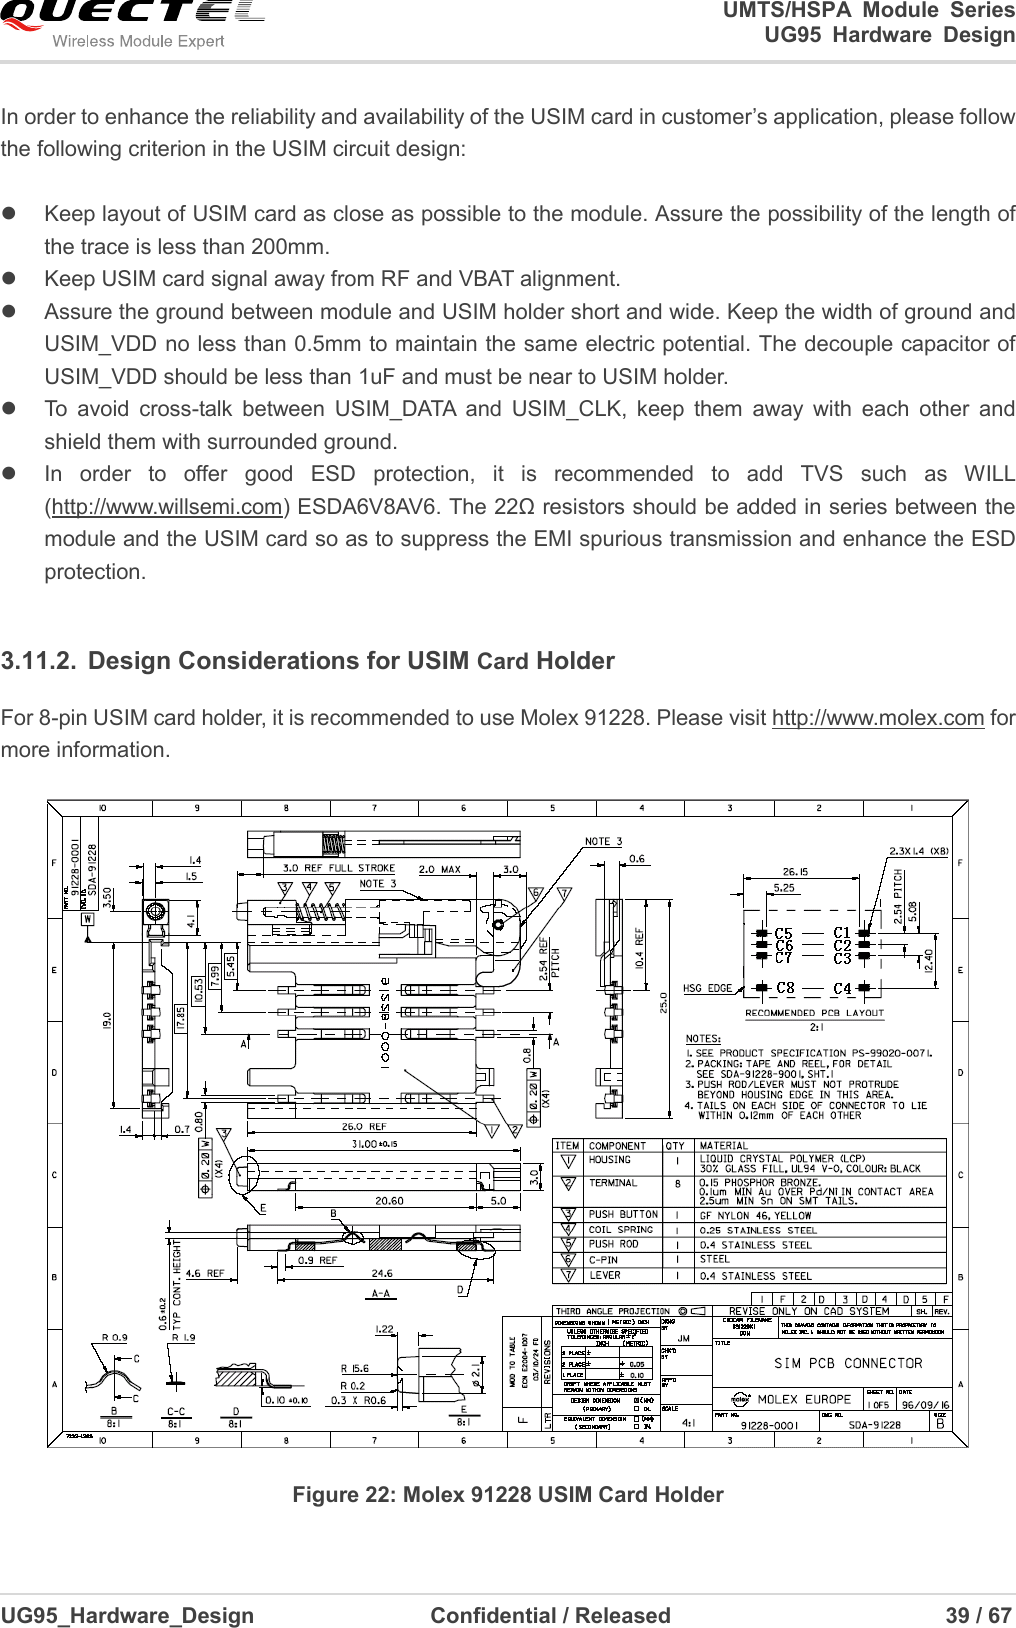                                                                                                                                               UMTS/HSPA  Module  Series                                                                 UG95  Hardware  Design  UG95_Hardware_Design                  Confidential / Released                             39 / 67    In order to enhance the reliability and availability of the USIM card in customer’s application, please follow the following criterion in the USIM circuit design:    Keep layout of USIM card as close as possible to the module. Assure the possibility of the length of the trace is less than 200mm.     Keep USIM card signal away from RF and VBAT alignment.   Assure the ground between module and USIM holder short and wide. Keep the width of ground and USIM_VDD no less than 0.5mm to maintain the same electric potential. The decouple capacitor of USIM_VDD should be less than 1uF and must be near to USIM holder.   To  avoid  cross-talk  between  USIM_DATA  and  USIM_CLK,  keep  them  away  with  each  other  and shield them with surrounded ground.     In  order  to  offer  good  ESD  protection,  it  is  recommended  to  add  TVS  such  as  WILL (http://www.willsemi.com) ESDA6V8AV6. The 22Ω resistors should be added in series between the module and the USIM card so as to suppress the EMI spurious transmission and enhance the ESD protection.    3.11.2.  Design Considerations for USIM Card Holder For 8-pin USIM card holder, it is recommended to use Molex 91228. Please visit http://www.molex.com for more information.   Figure 22: Molex 91228 USIM Card Holder 